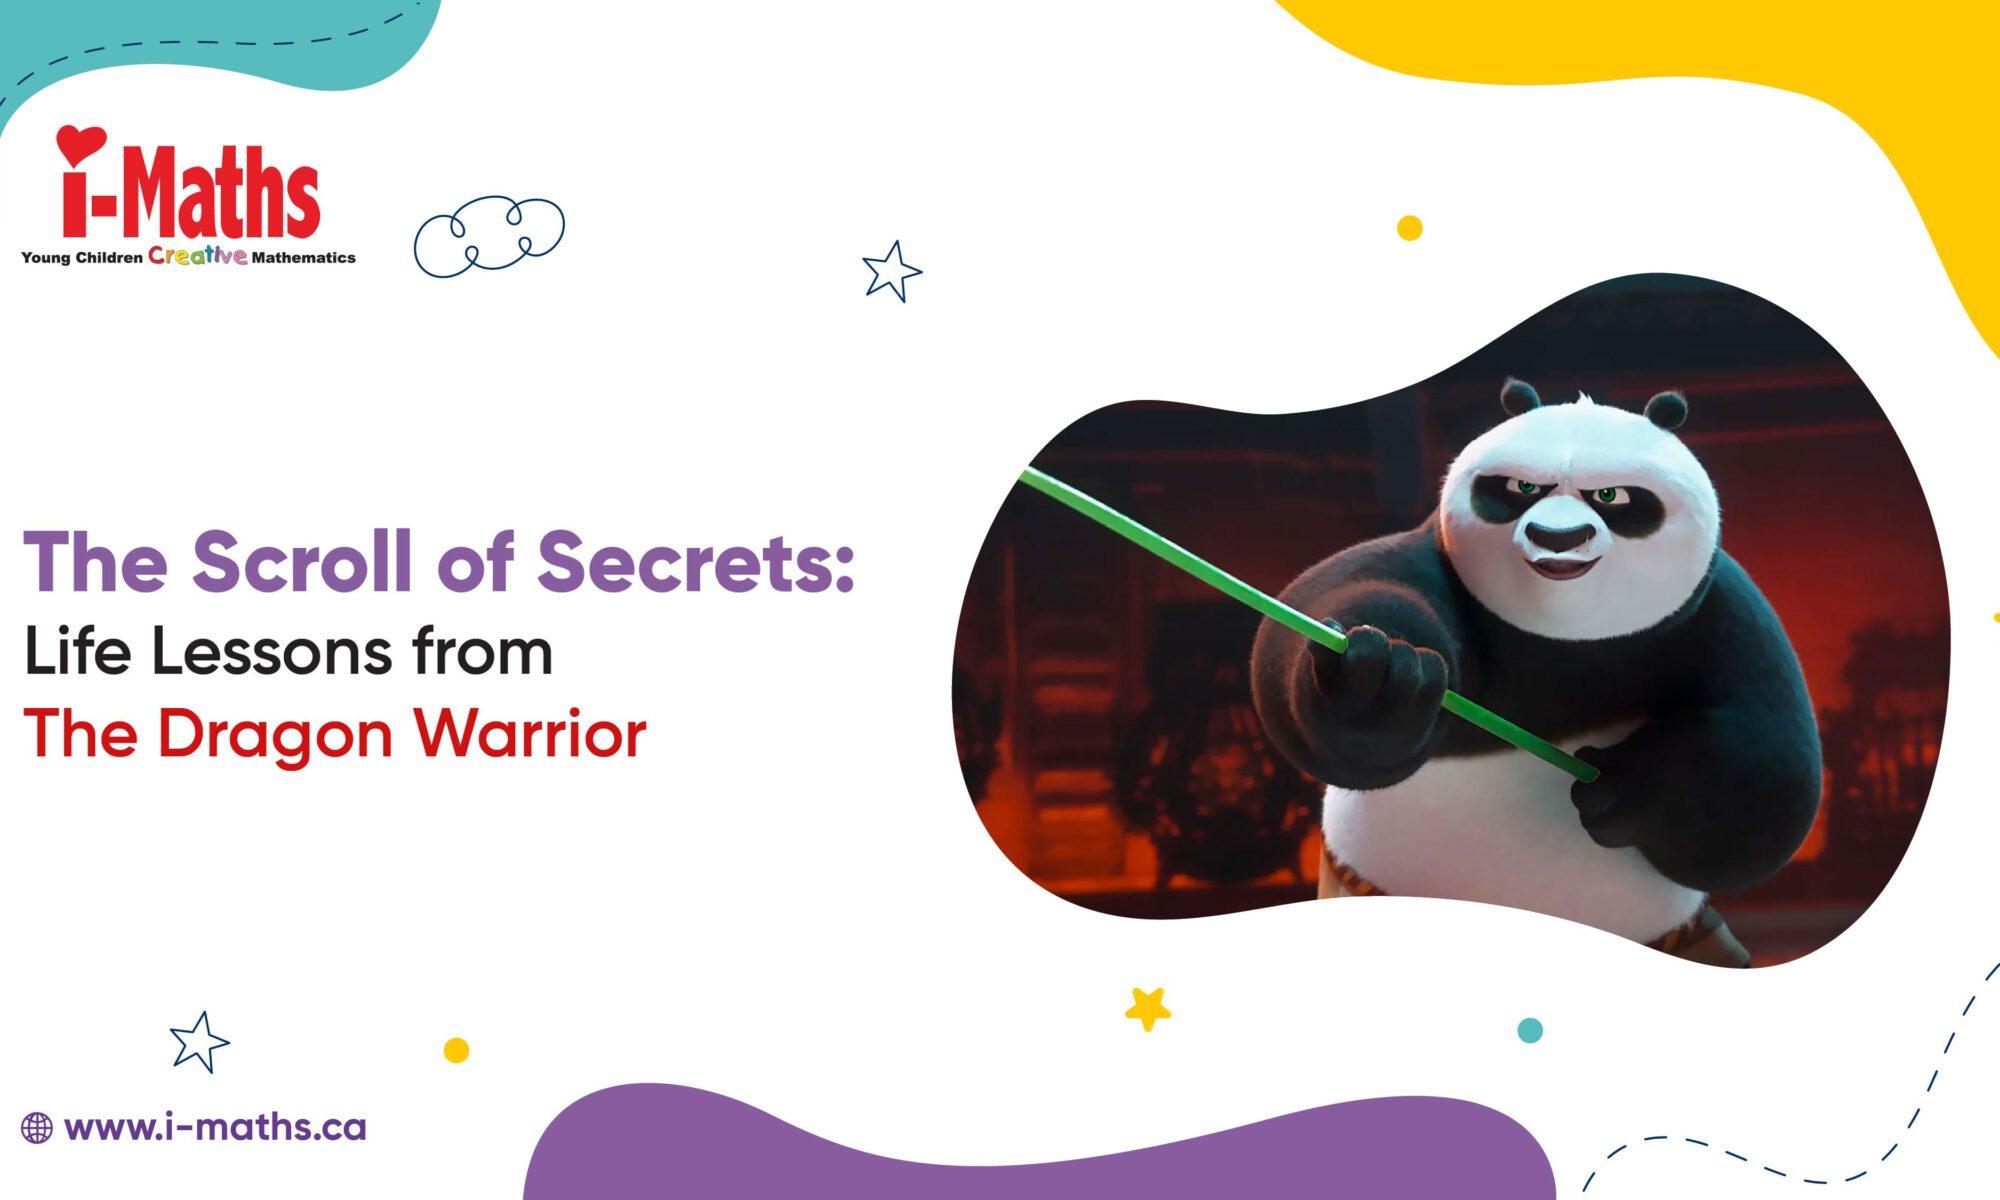 i-Maths Banner Text: The Scroll of Secrets: Life Lessons from The Dragon Warrior. www.i-maths.ca